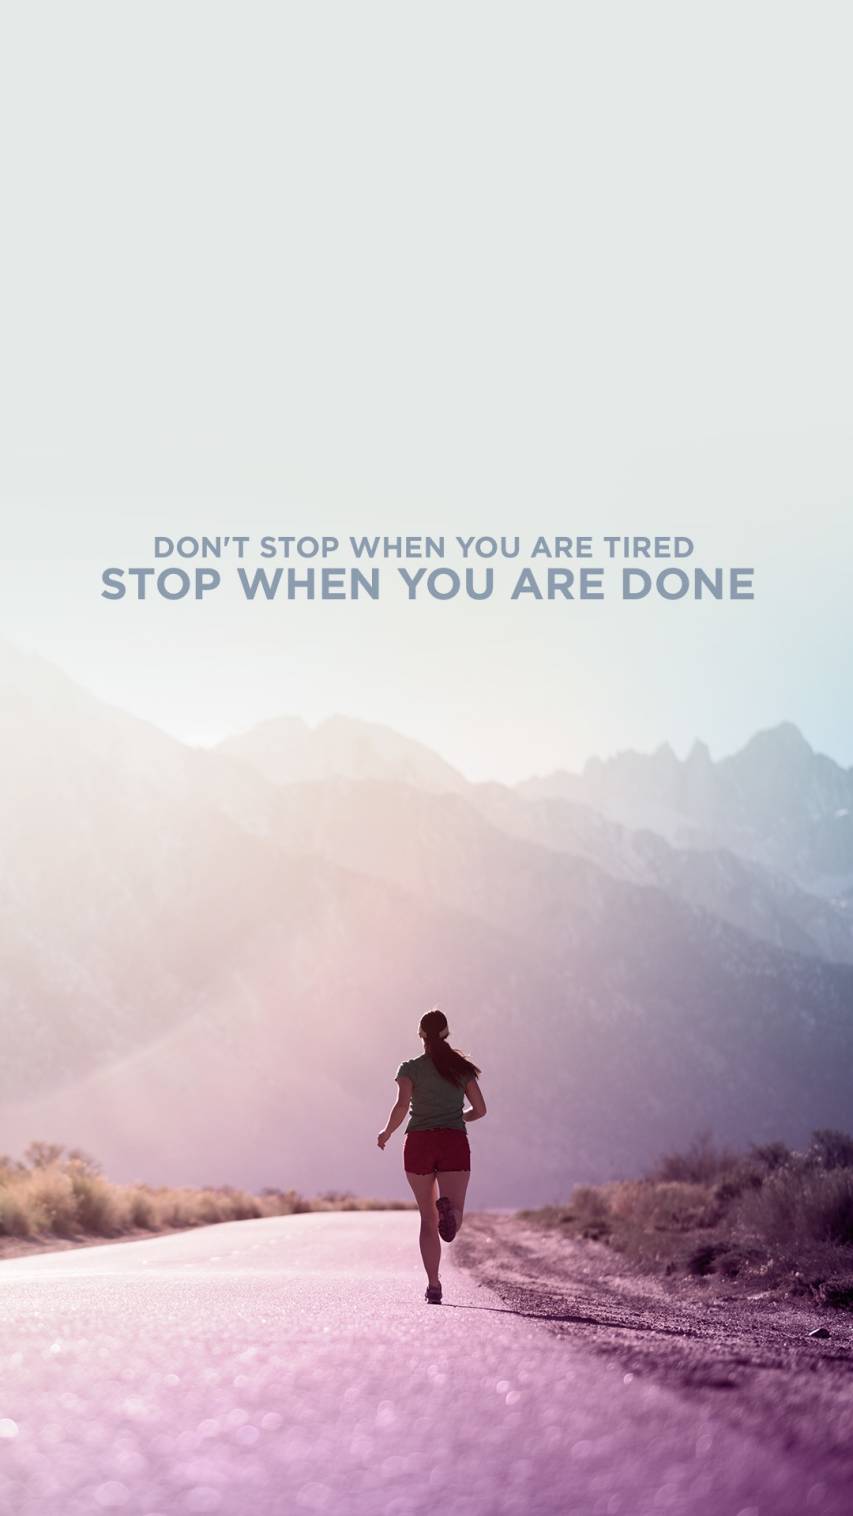 Amazing Motivational Wallpapers for iPhone 6